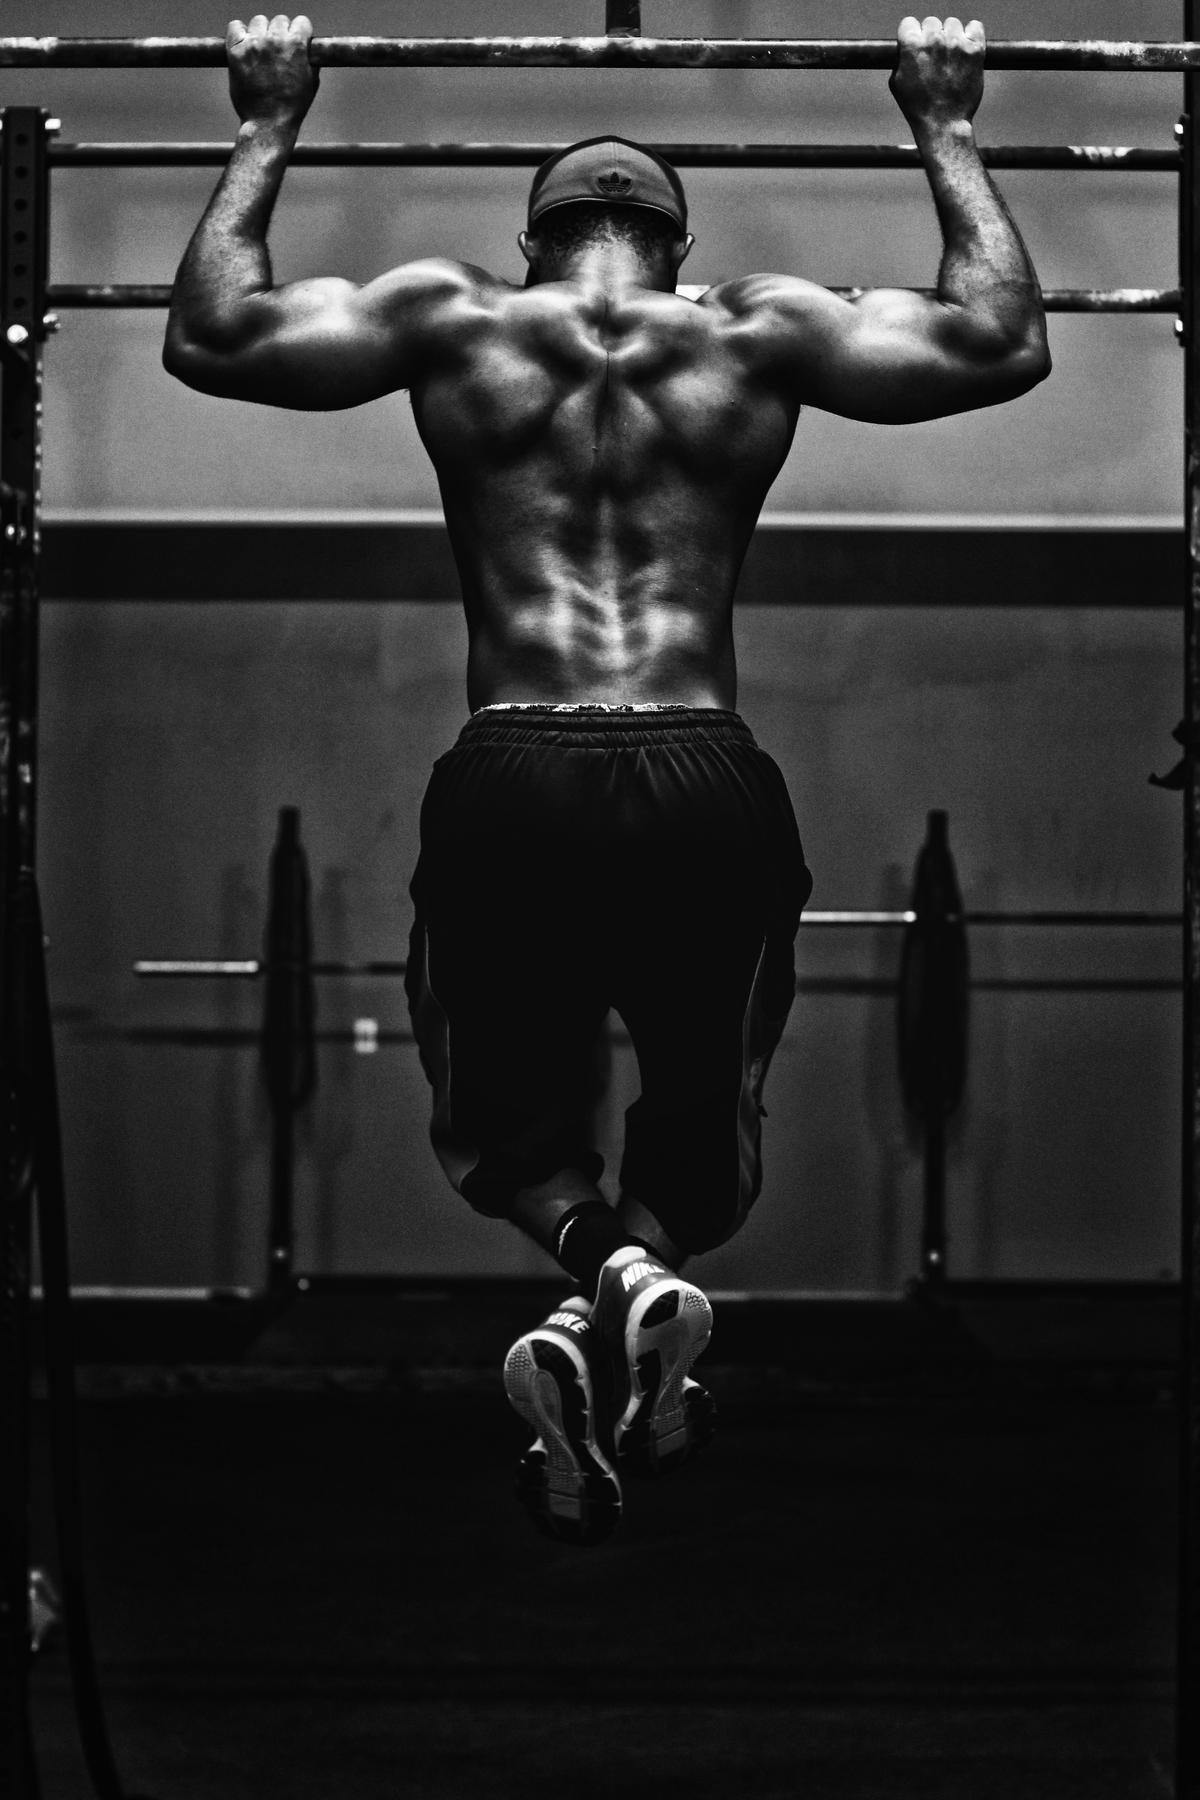 Image of a person working out in a gym, representing the importance of following a personal training schedule